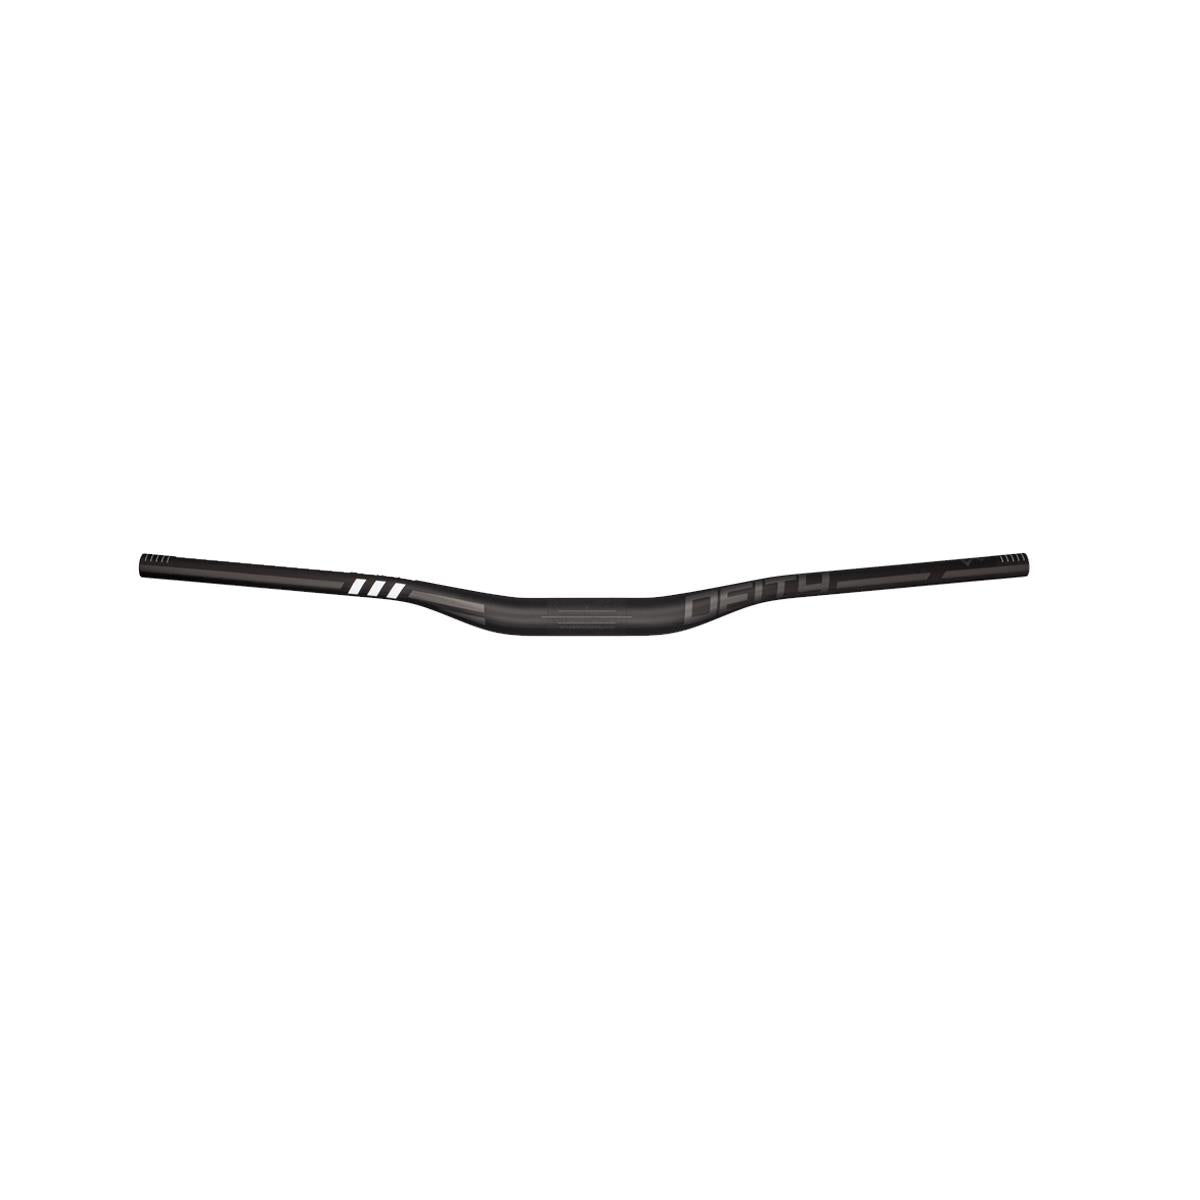 DEITY Skywire Carbon handlebars 35mm bore 25mm rise